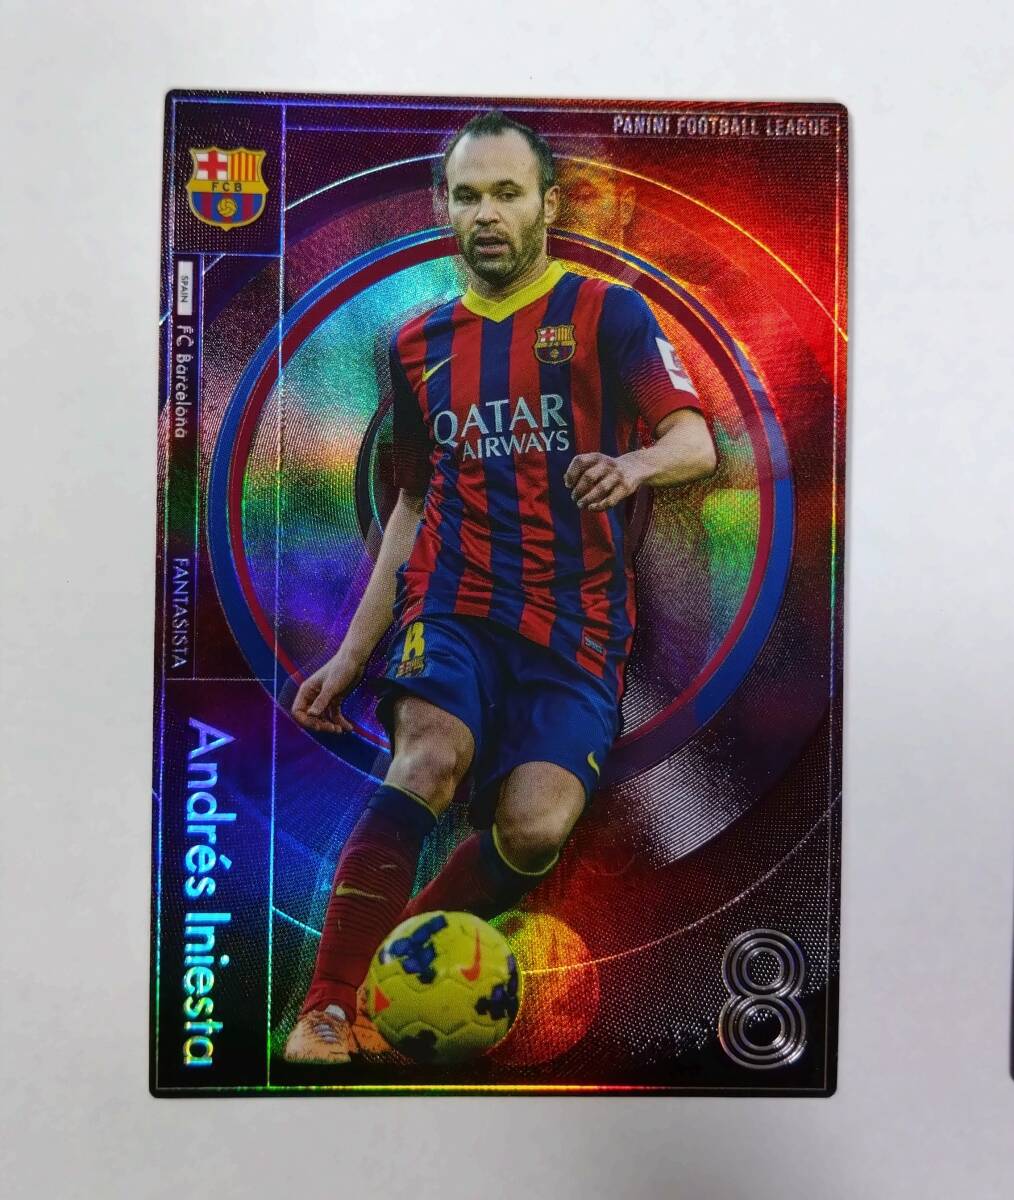  Panini Football League fan taji start Andre s*inie start [ prompt decision * including in a package possible ] PFL Barcelona 5.